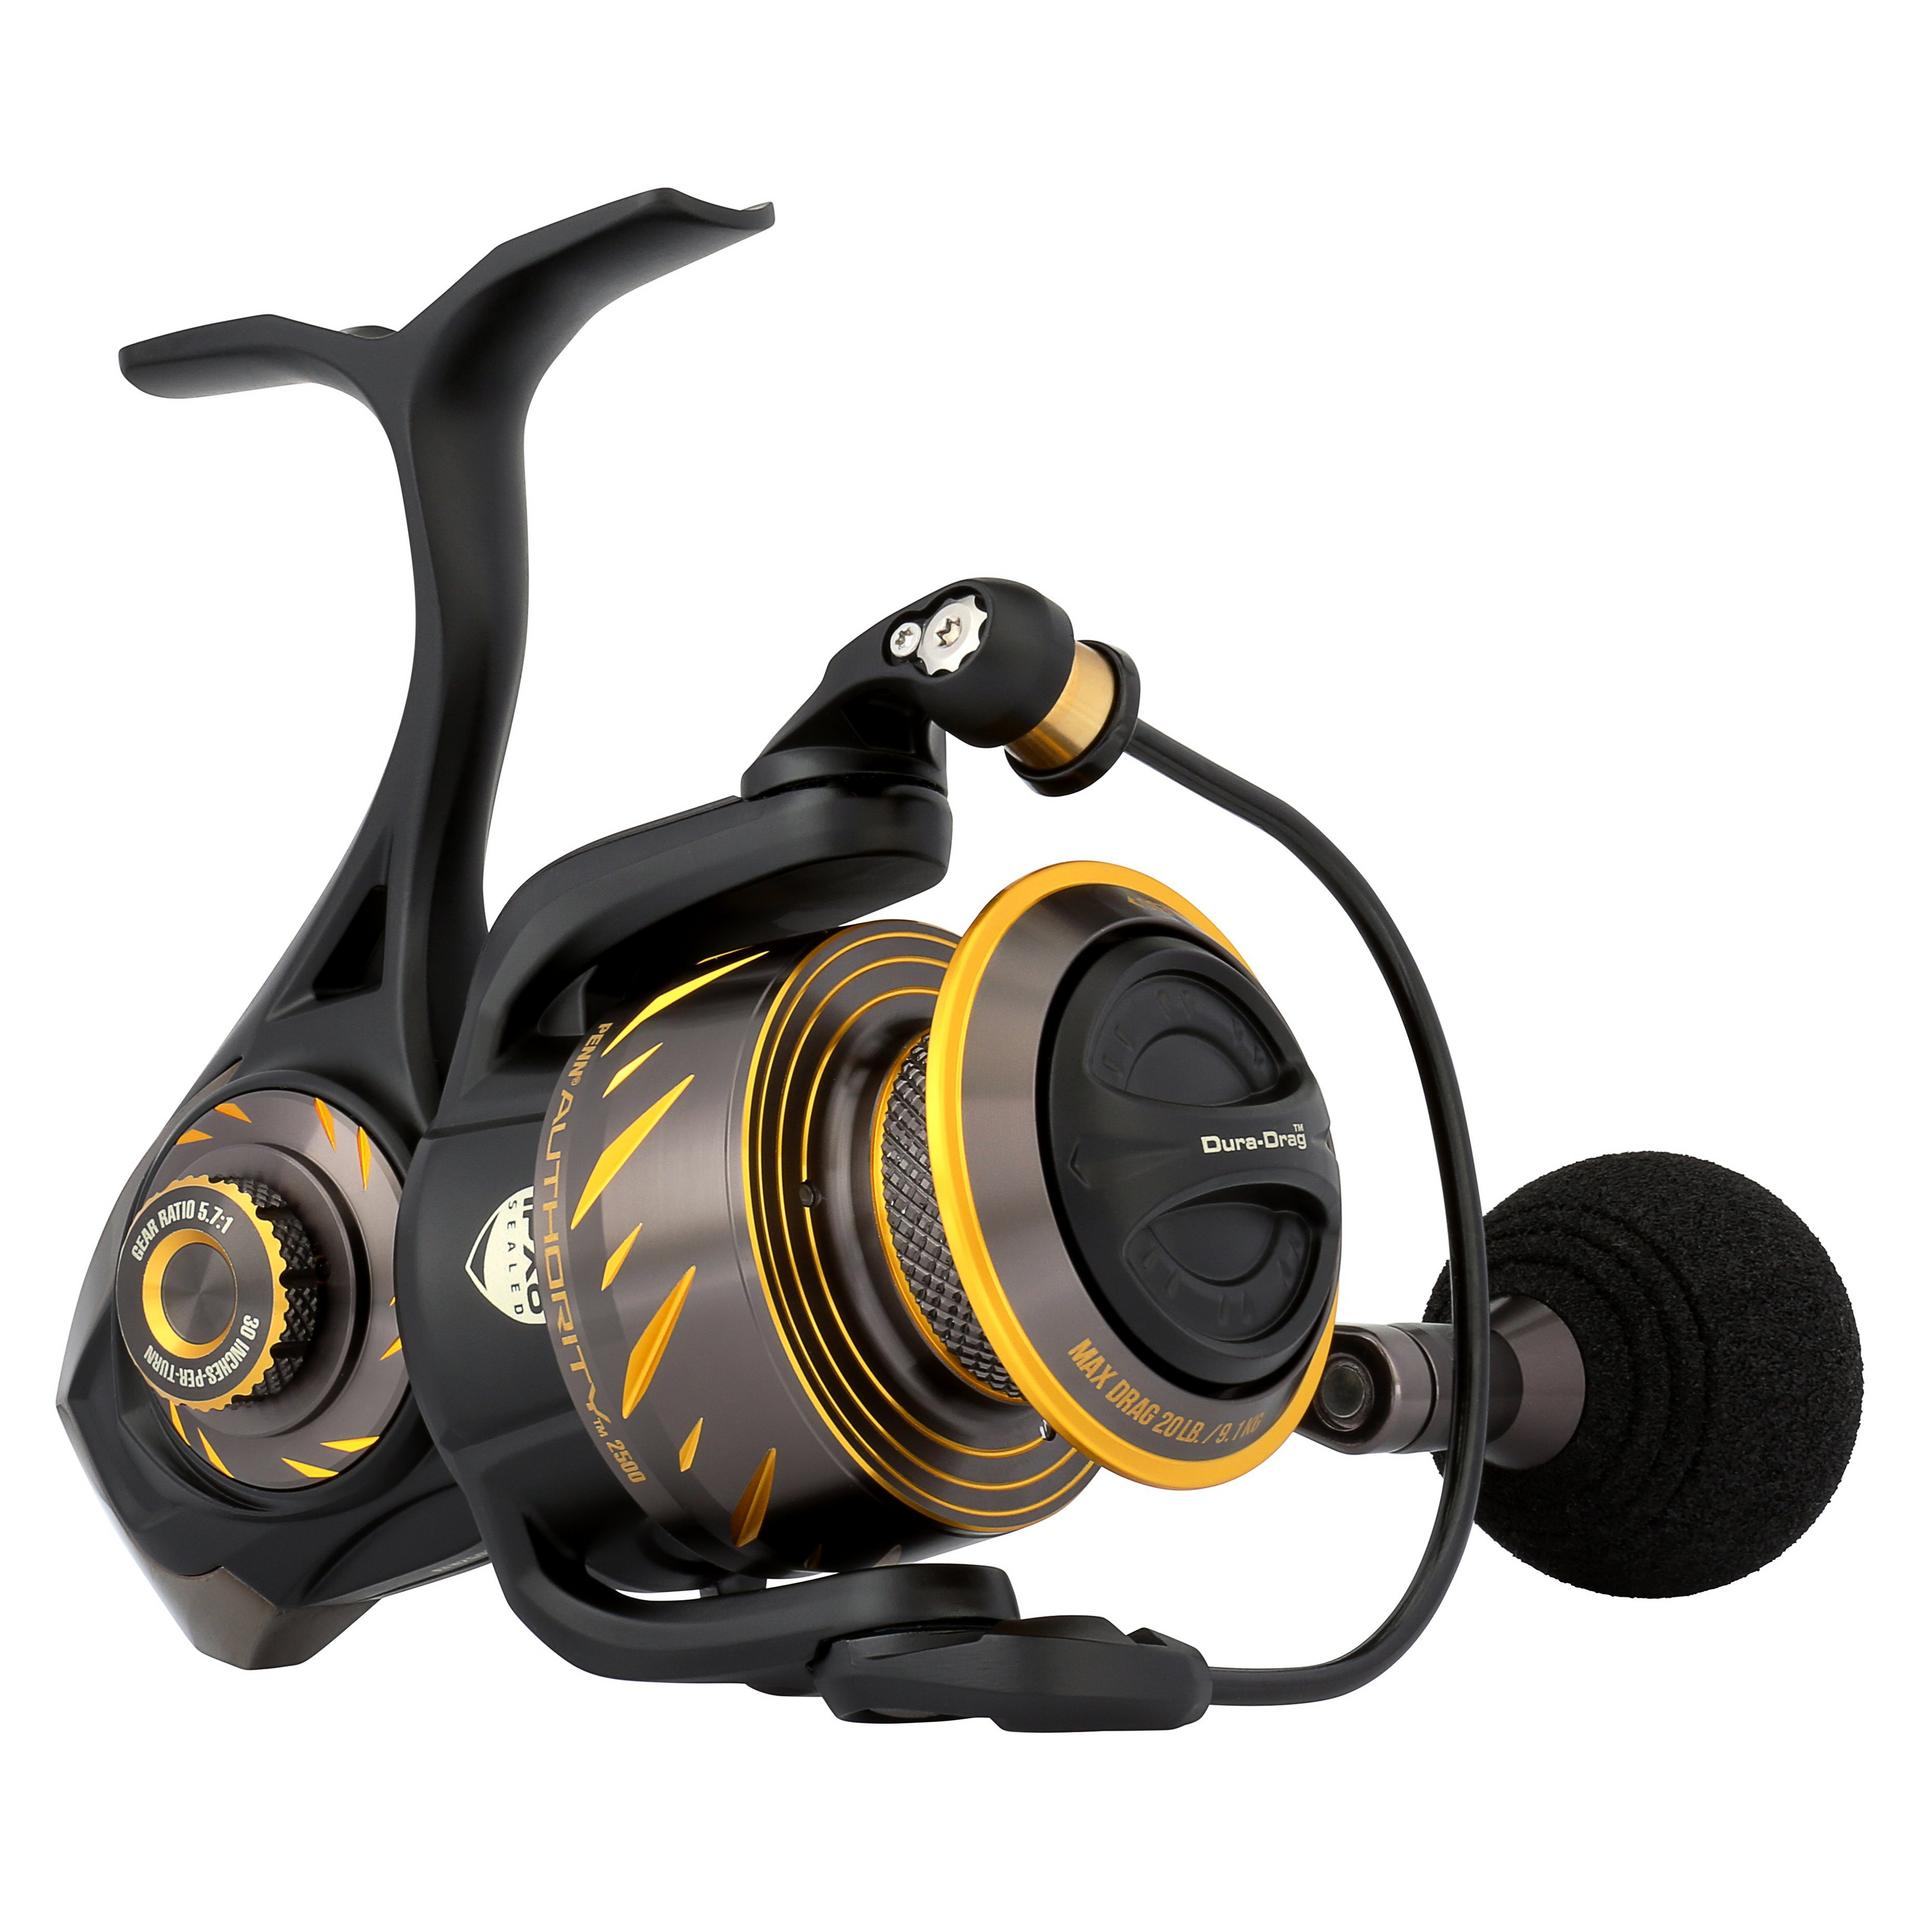 New AUTHORITY spinning reel specs now posted on PENN site